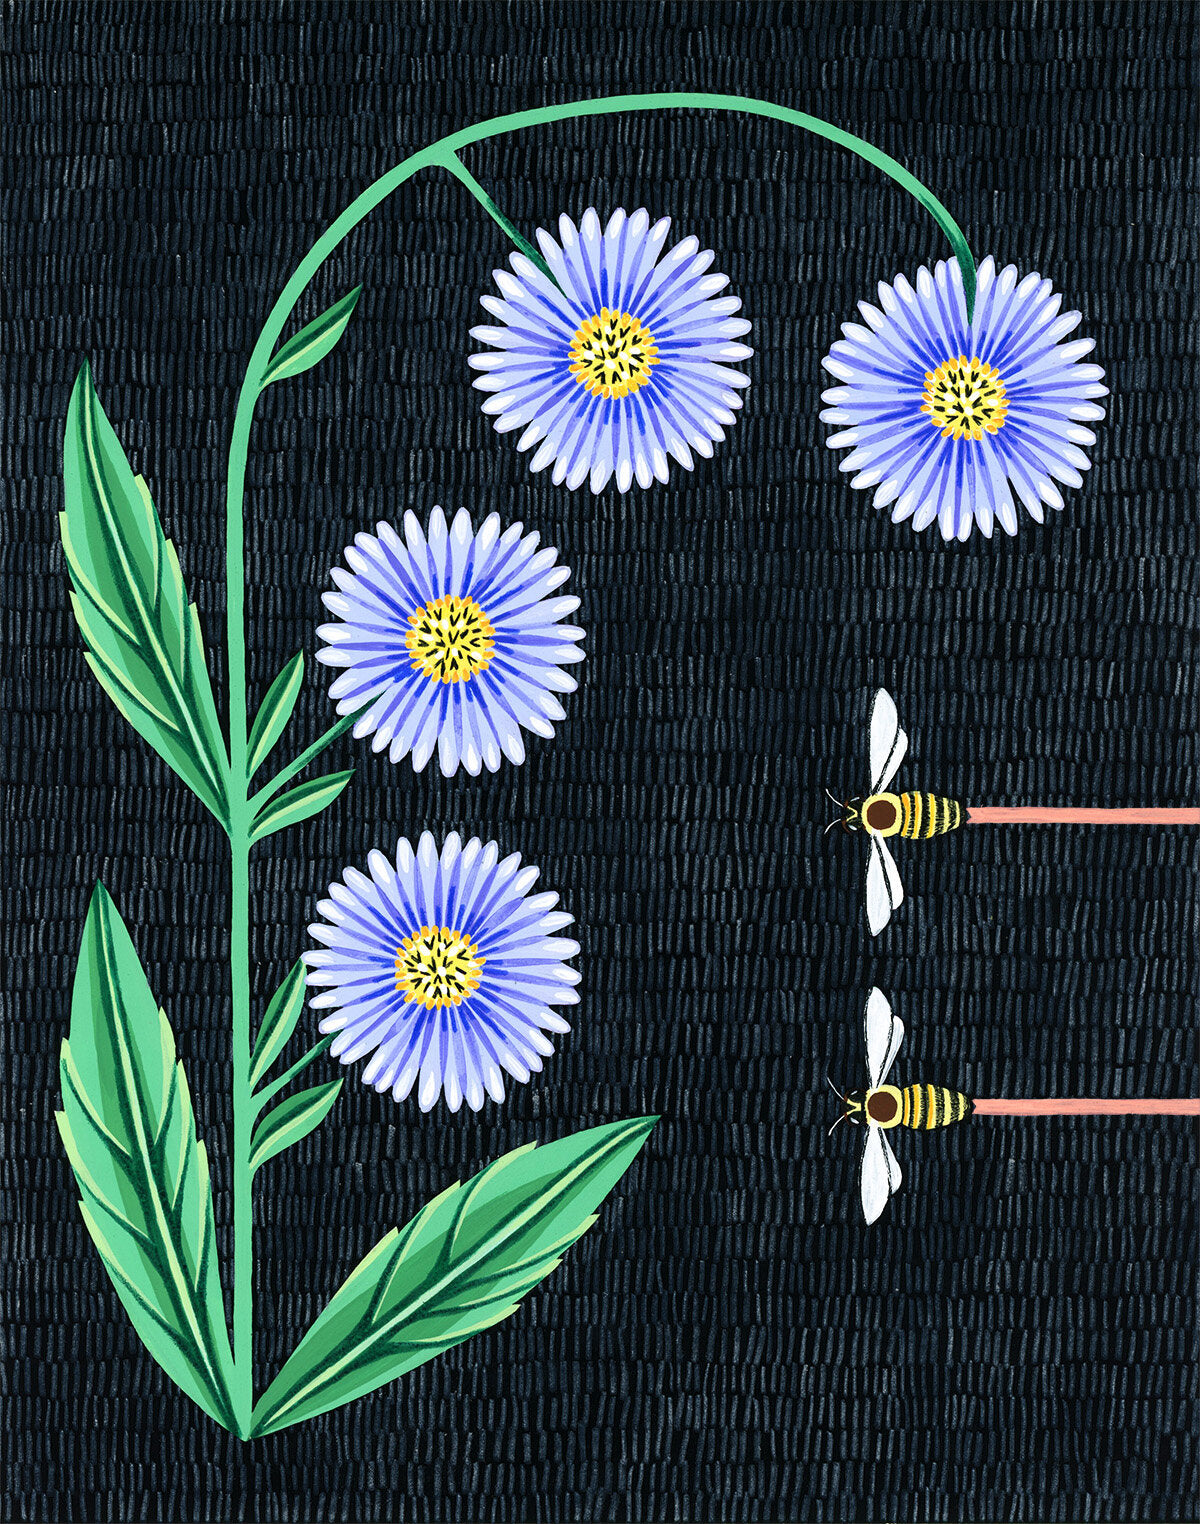 Original painting of aster flowers and bees